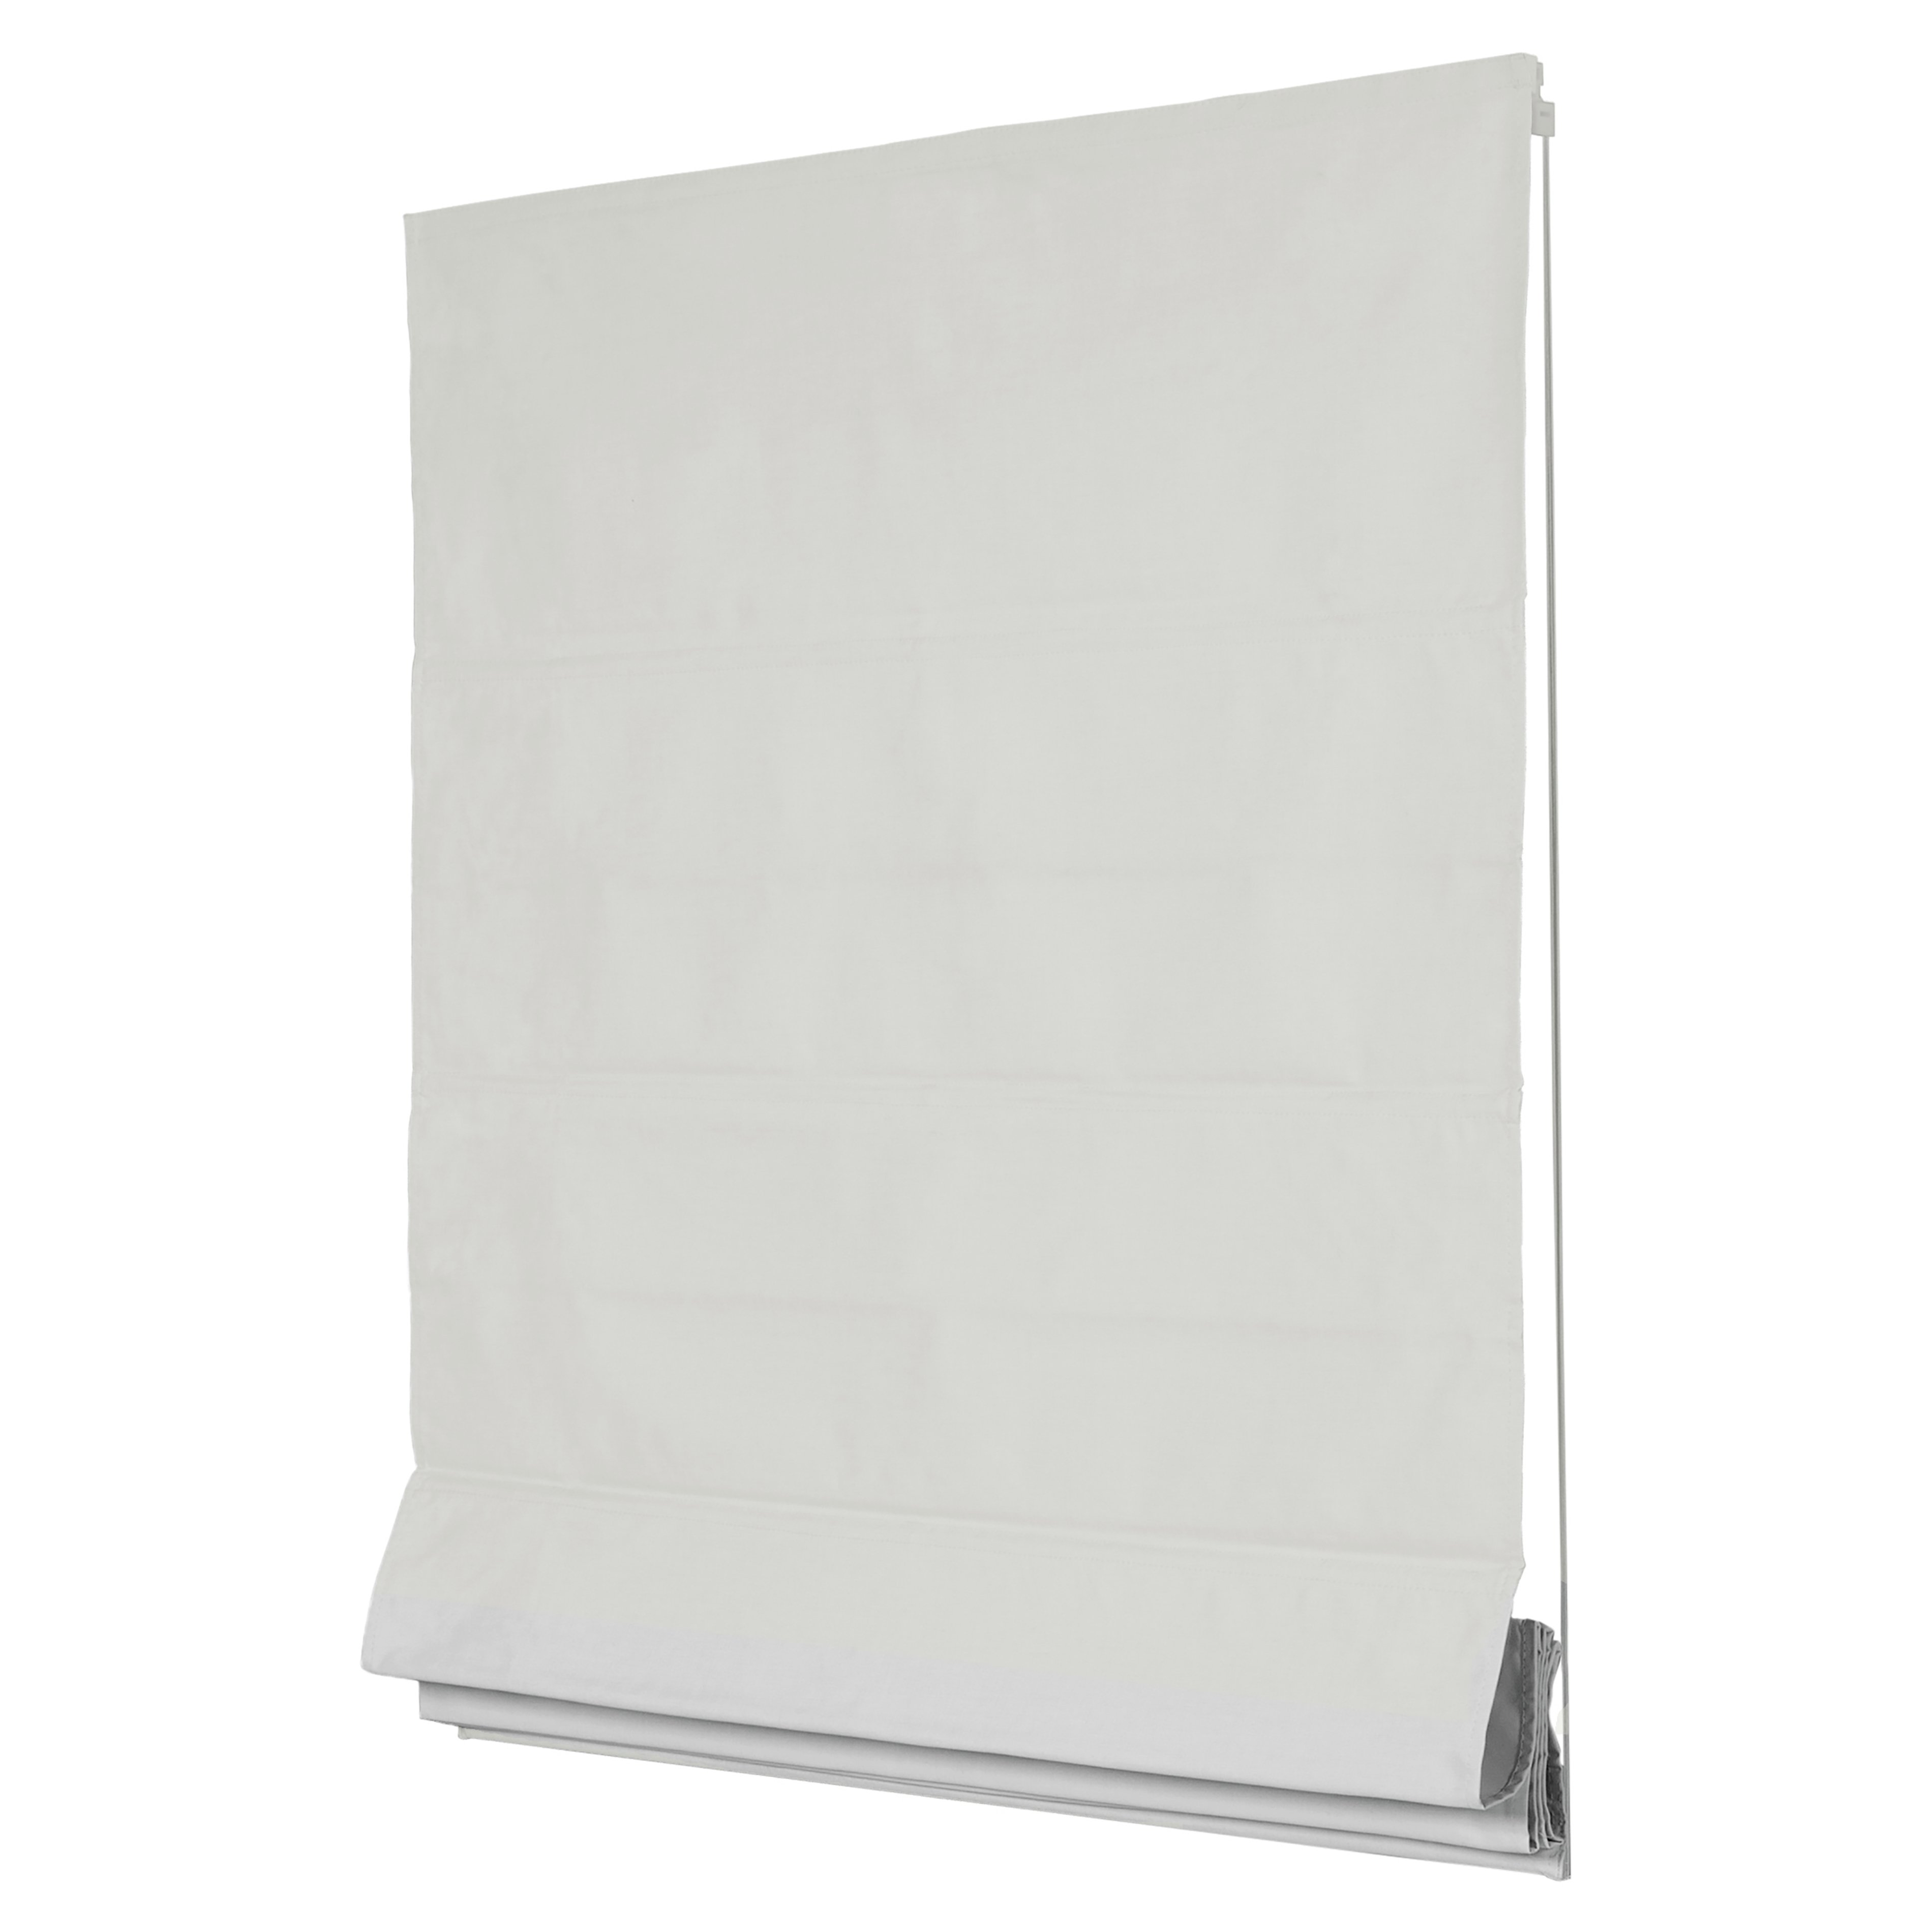 Intensions Roman Blind - 46ft - White